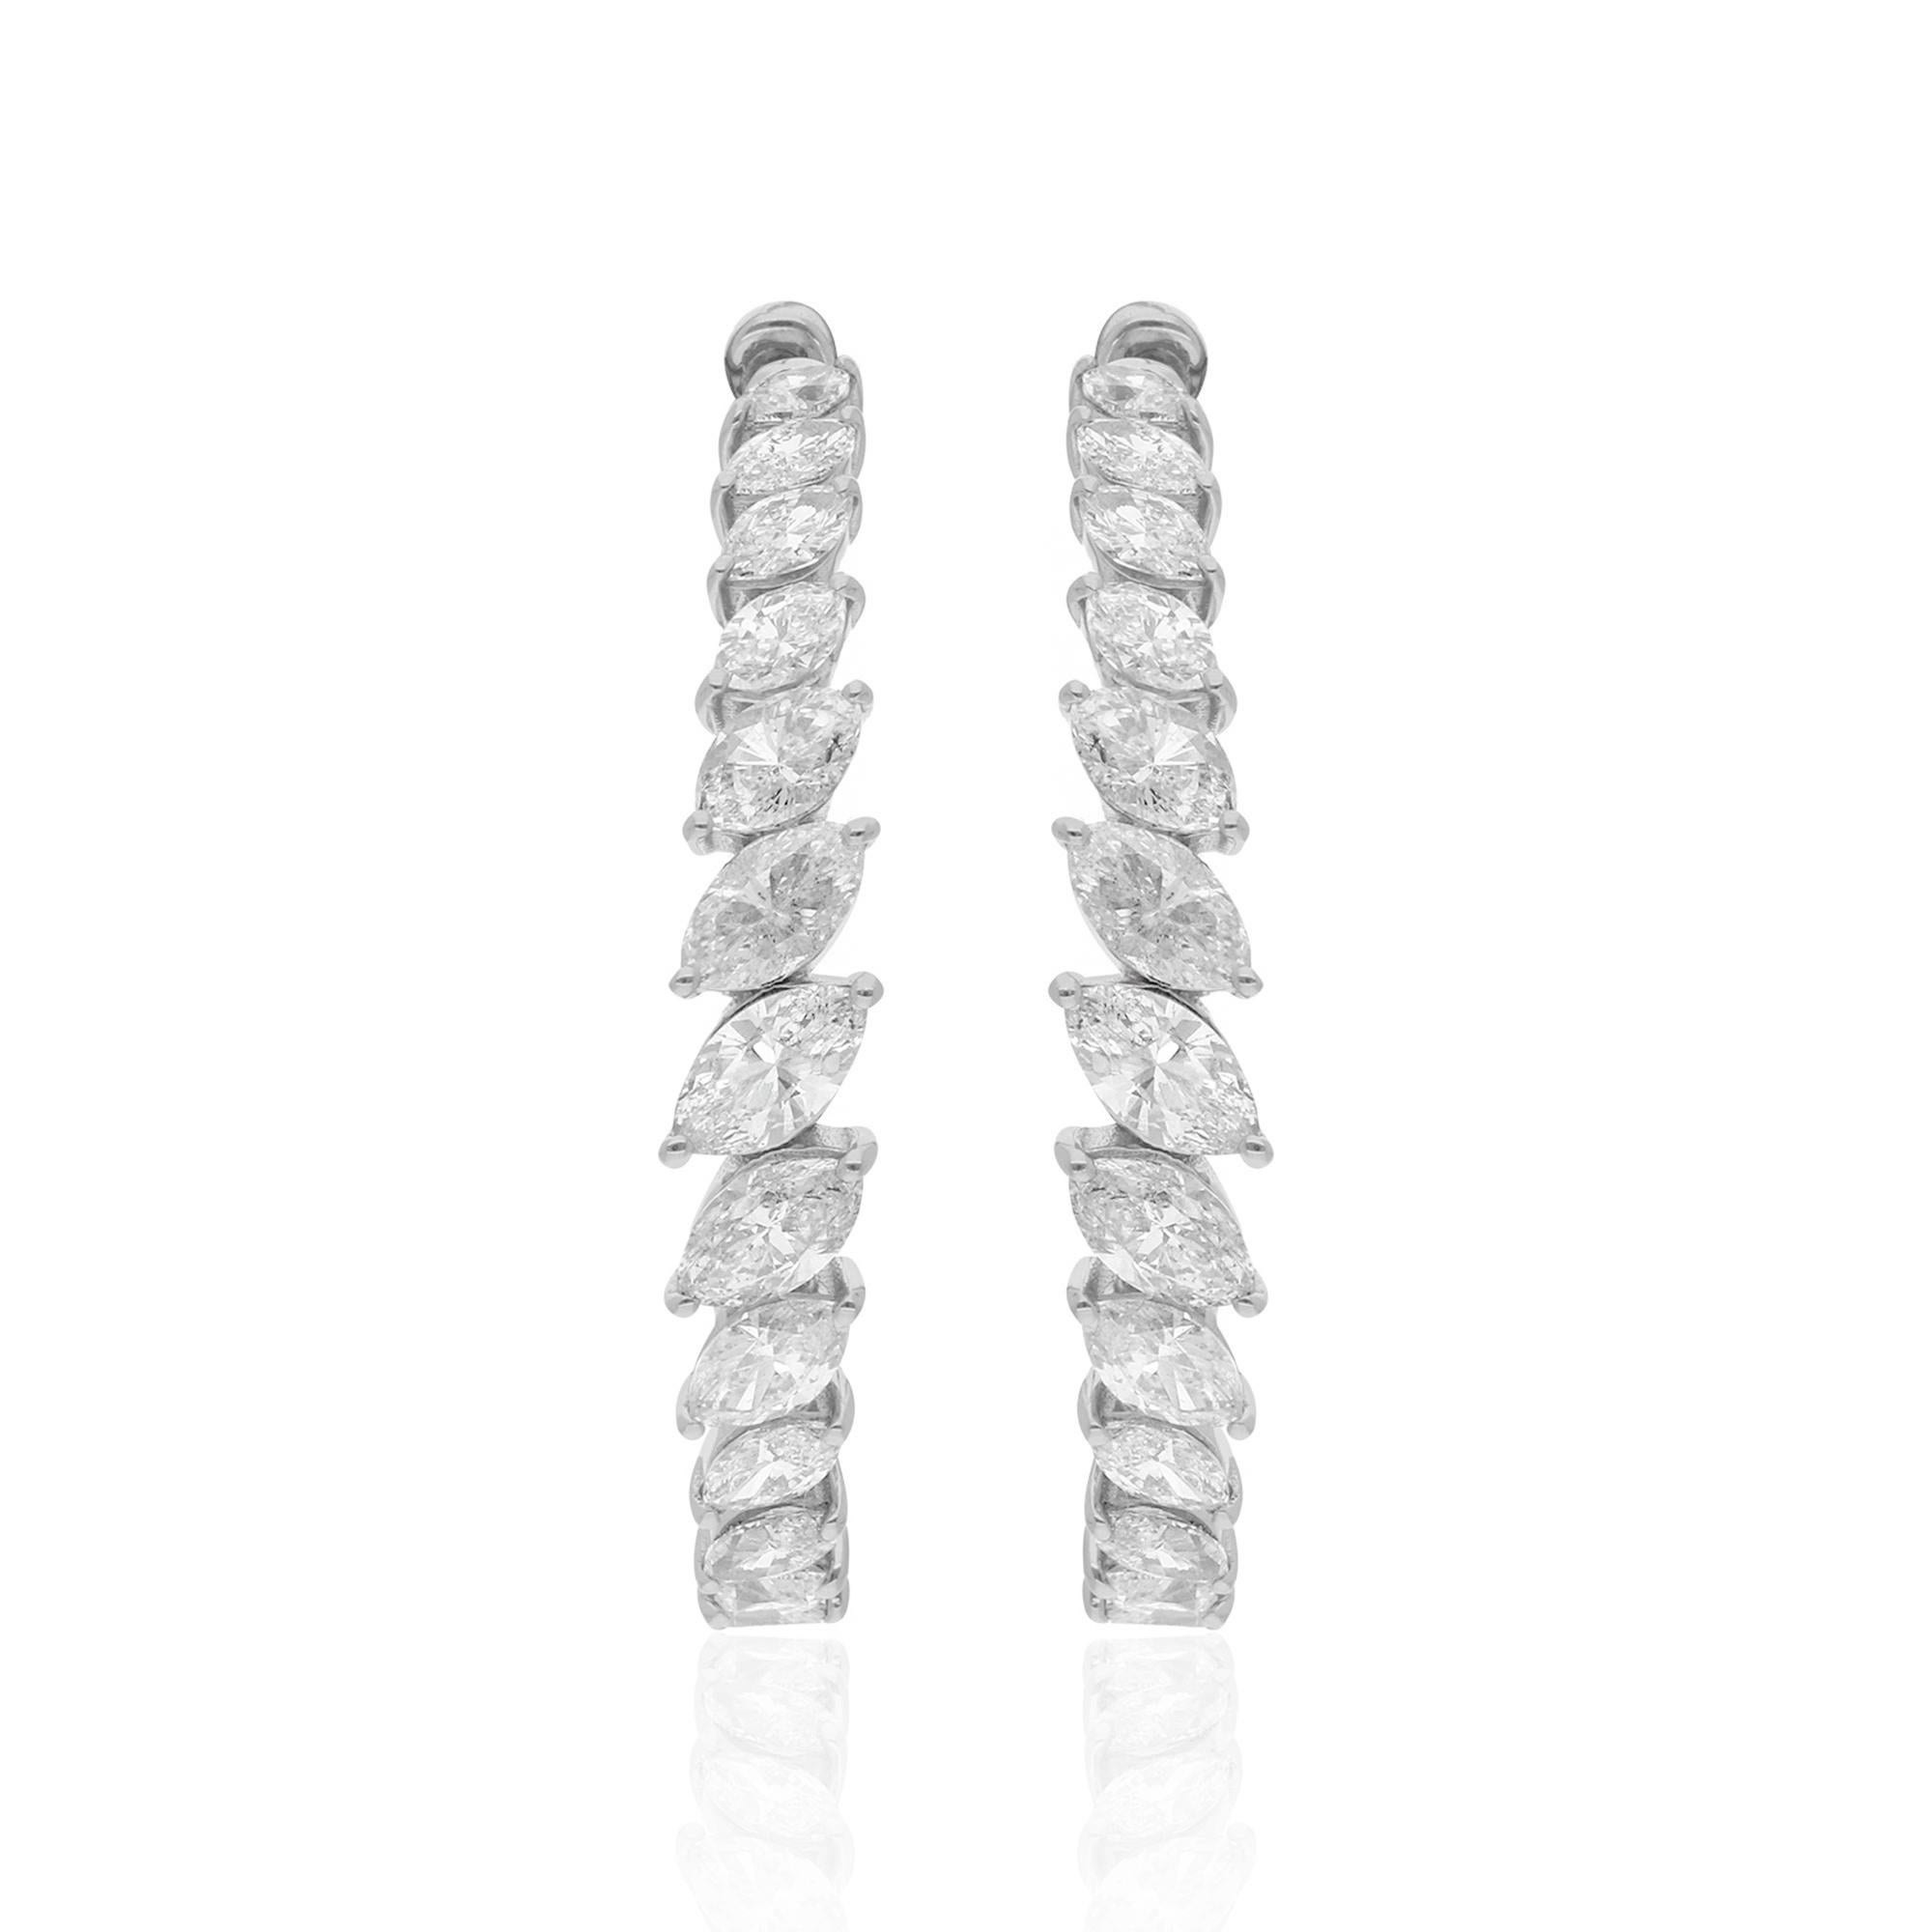 A perfect blend of classy and elegant design Earrings featuring 18k White Gold with Diamond. This is must to provide you an eye-catching attention.

✧✧Welcome To Our Shop Spectrum Jewels ✧✧

